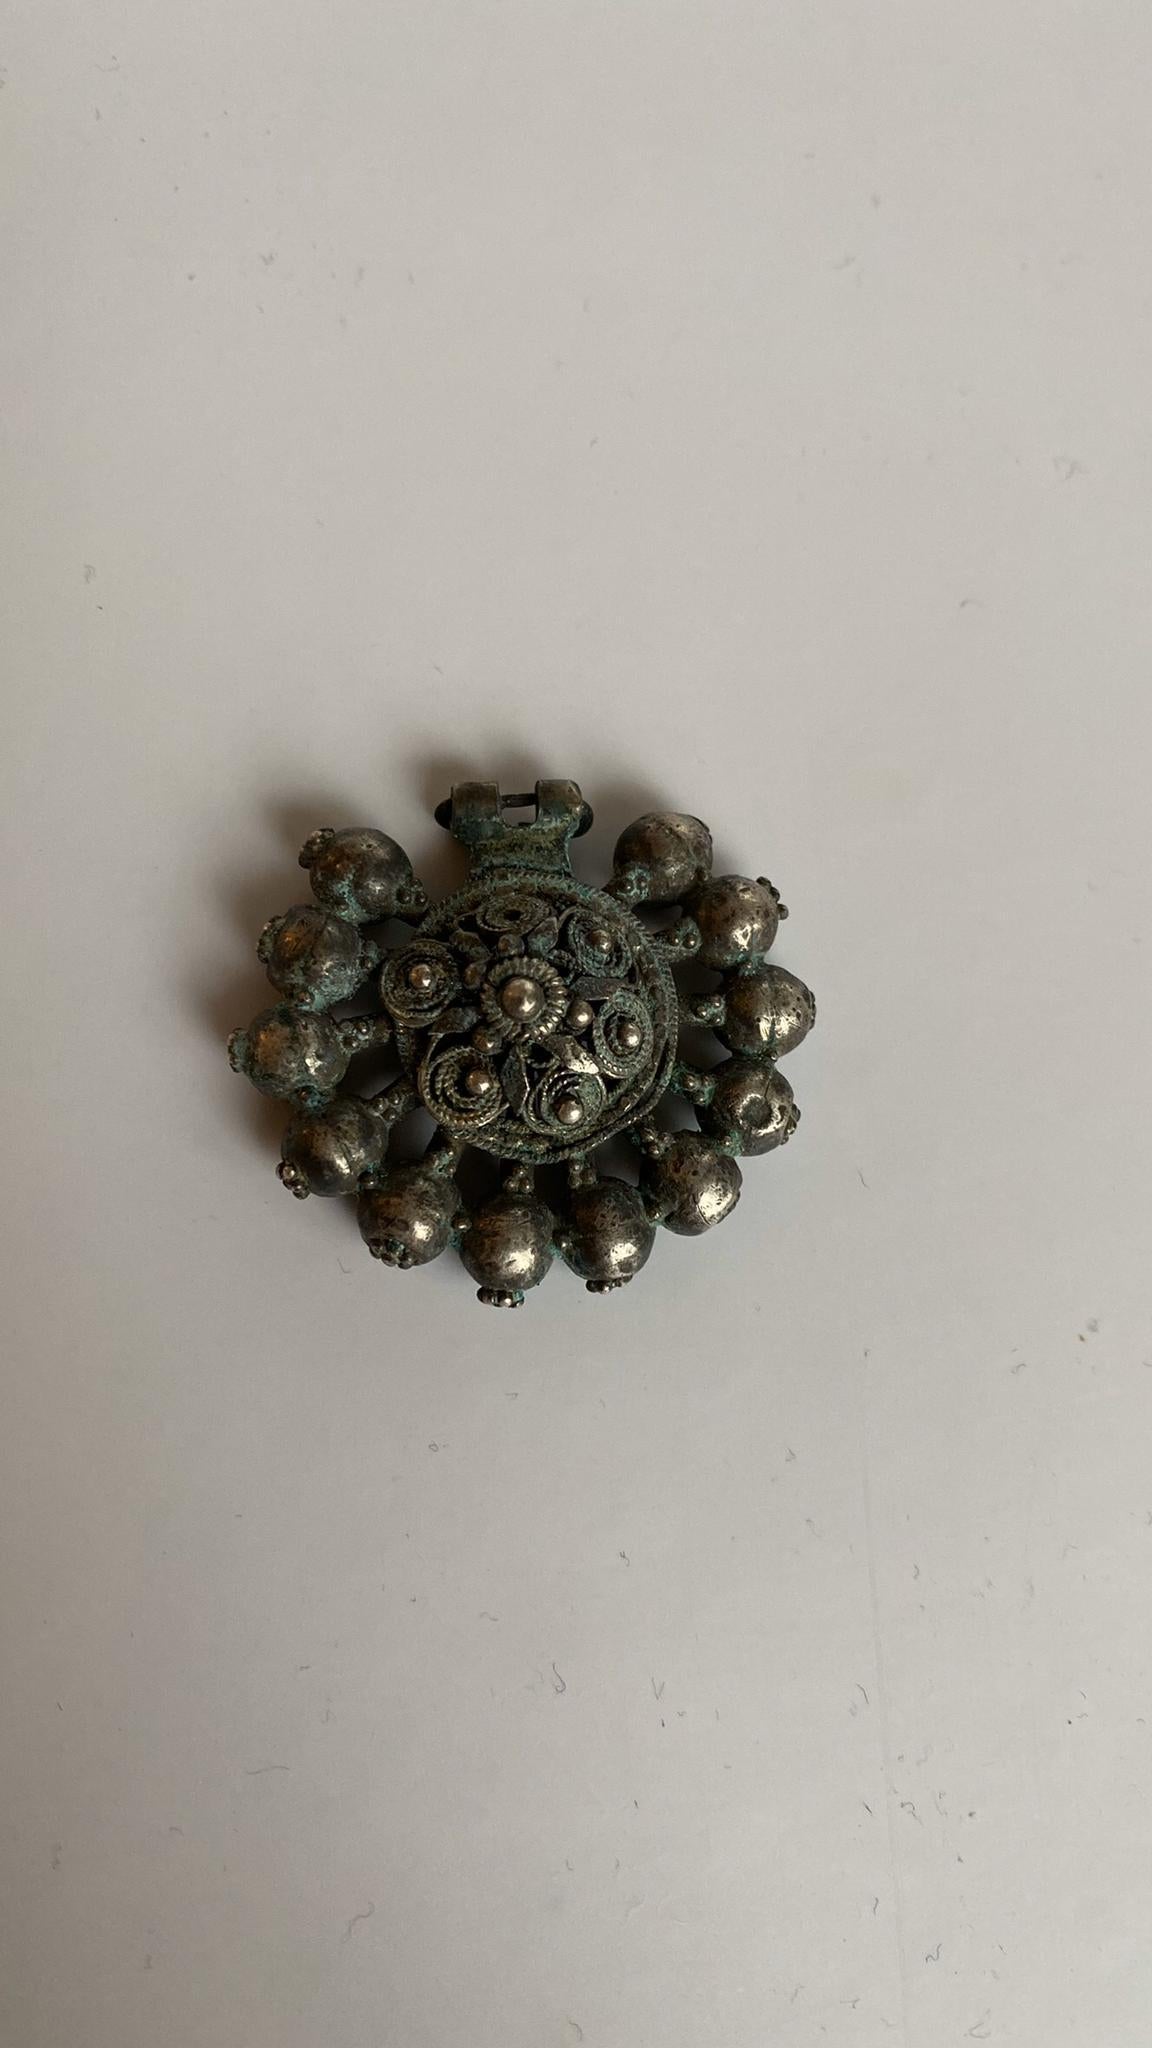 Authentic pair of earrings ('arpalii) comes from its origin town Vidin in Bulgaria.
Silver-gilt, in the form of a central rosette with applied beadwork, surrounded by a series of rod and bead elements all with pattern grainwork or granulation,